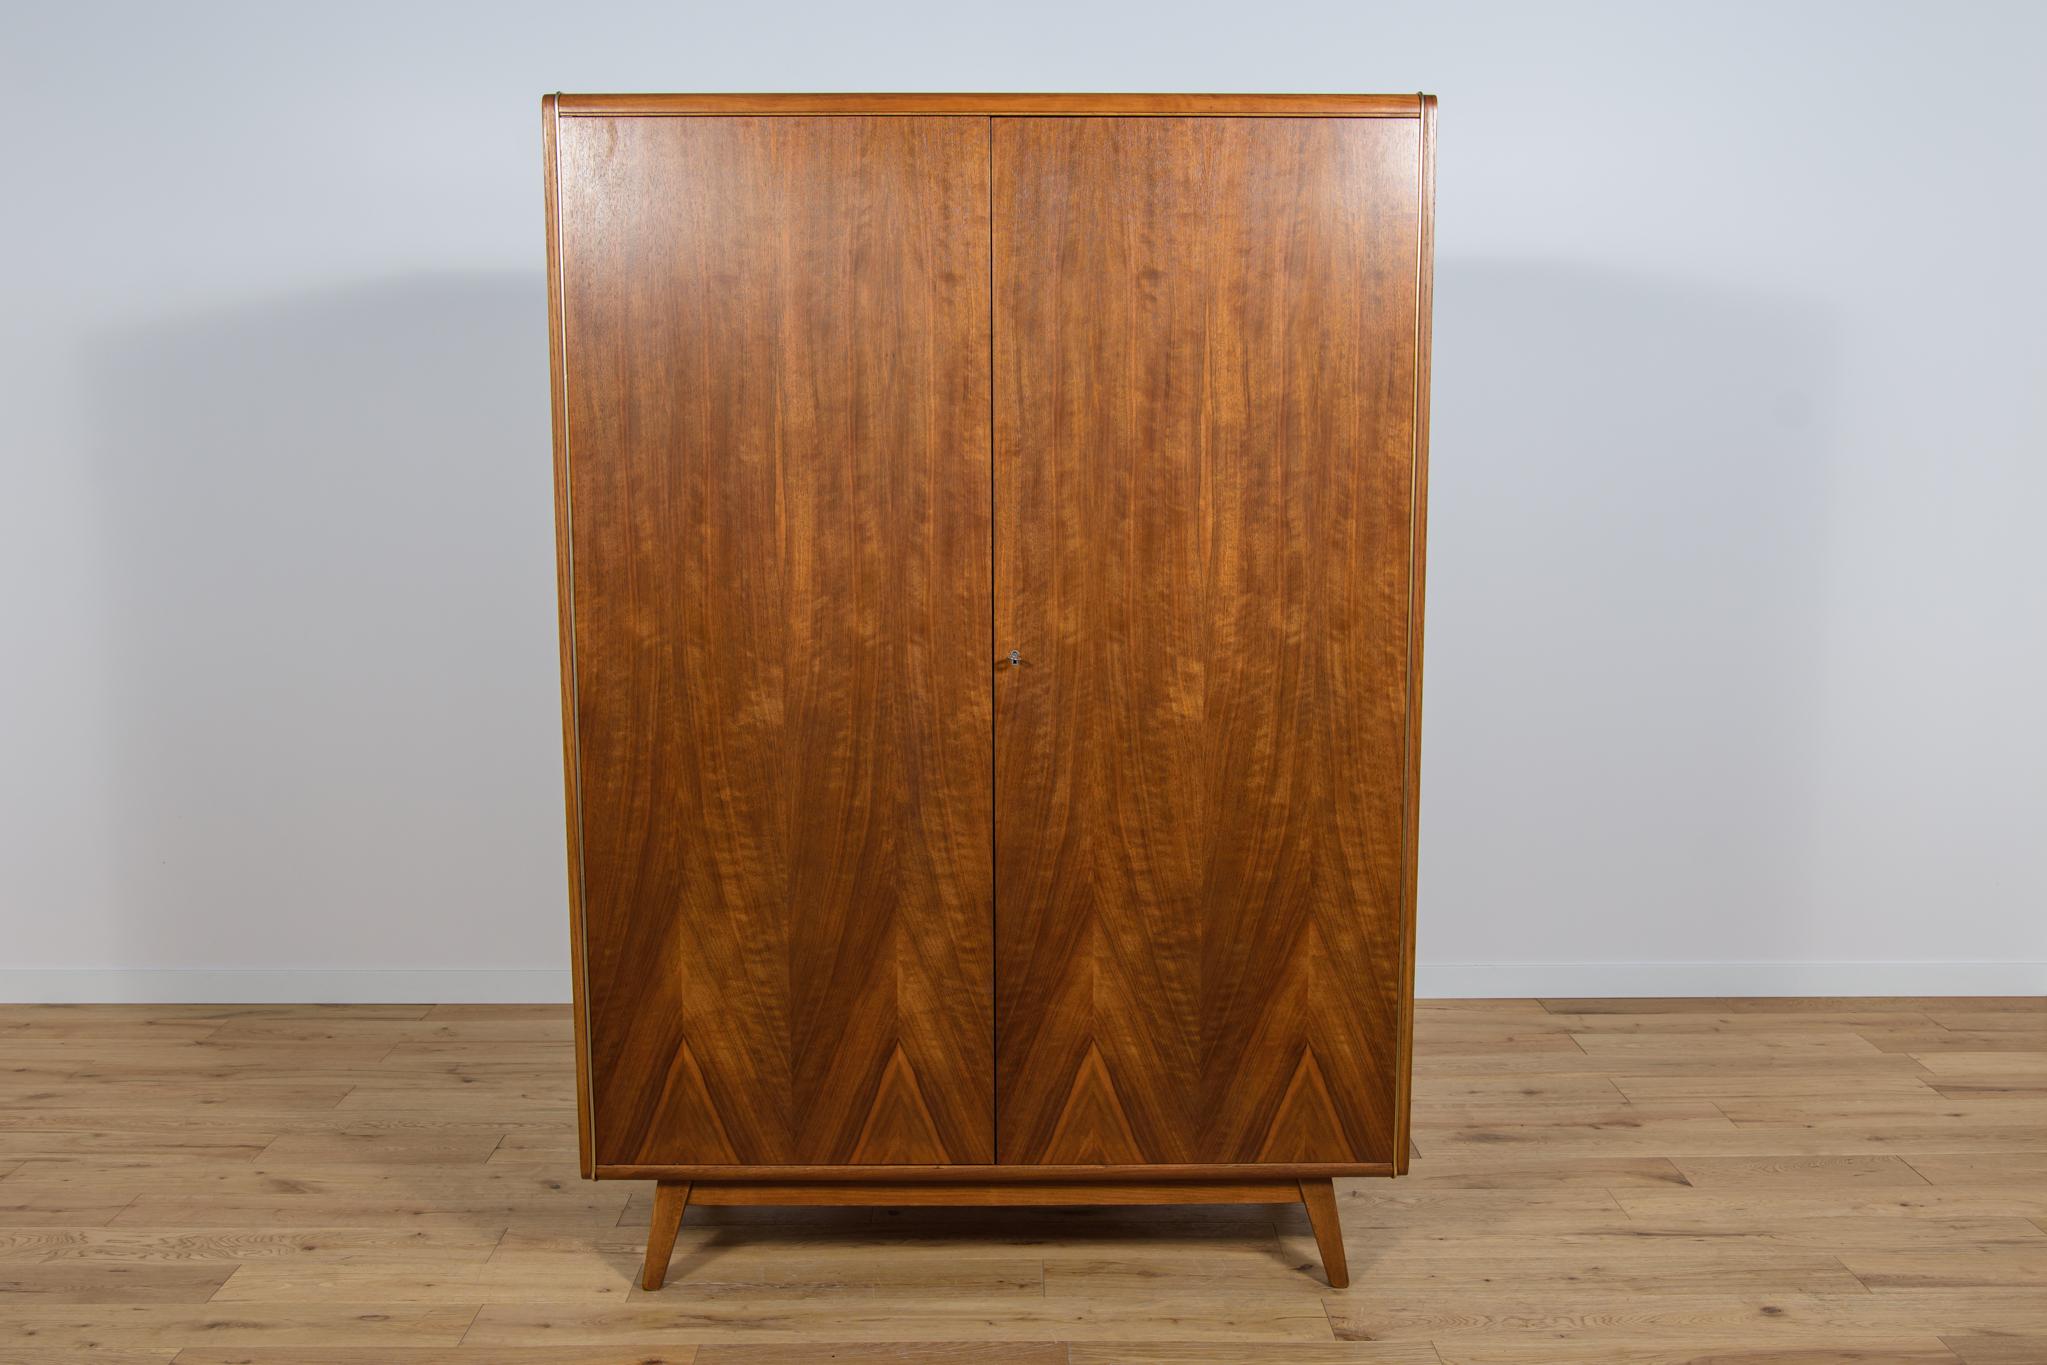 A wardrobe designed by Bohumil Landsman in the 1960s and manufactured by the Jiton Soběslav furniture factory in Czechoslovakia. Wardrobe fronts are made of interestingly grained walnut veneer, sides veneered with ash. Solid beech wood elements. The